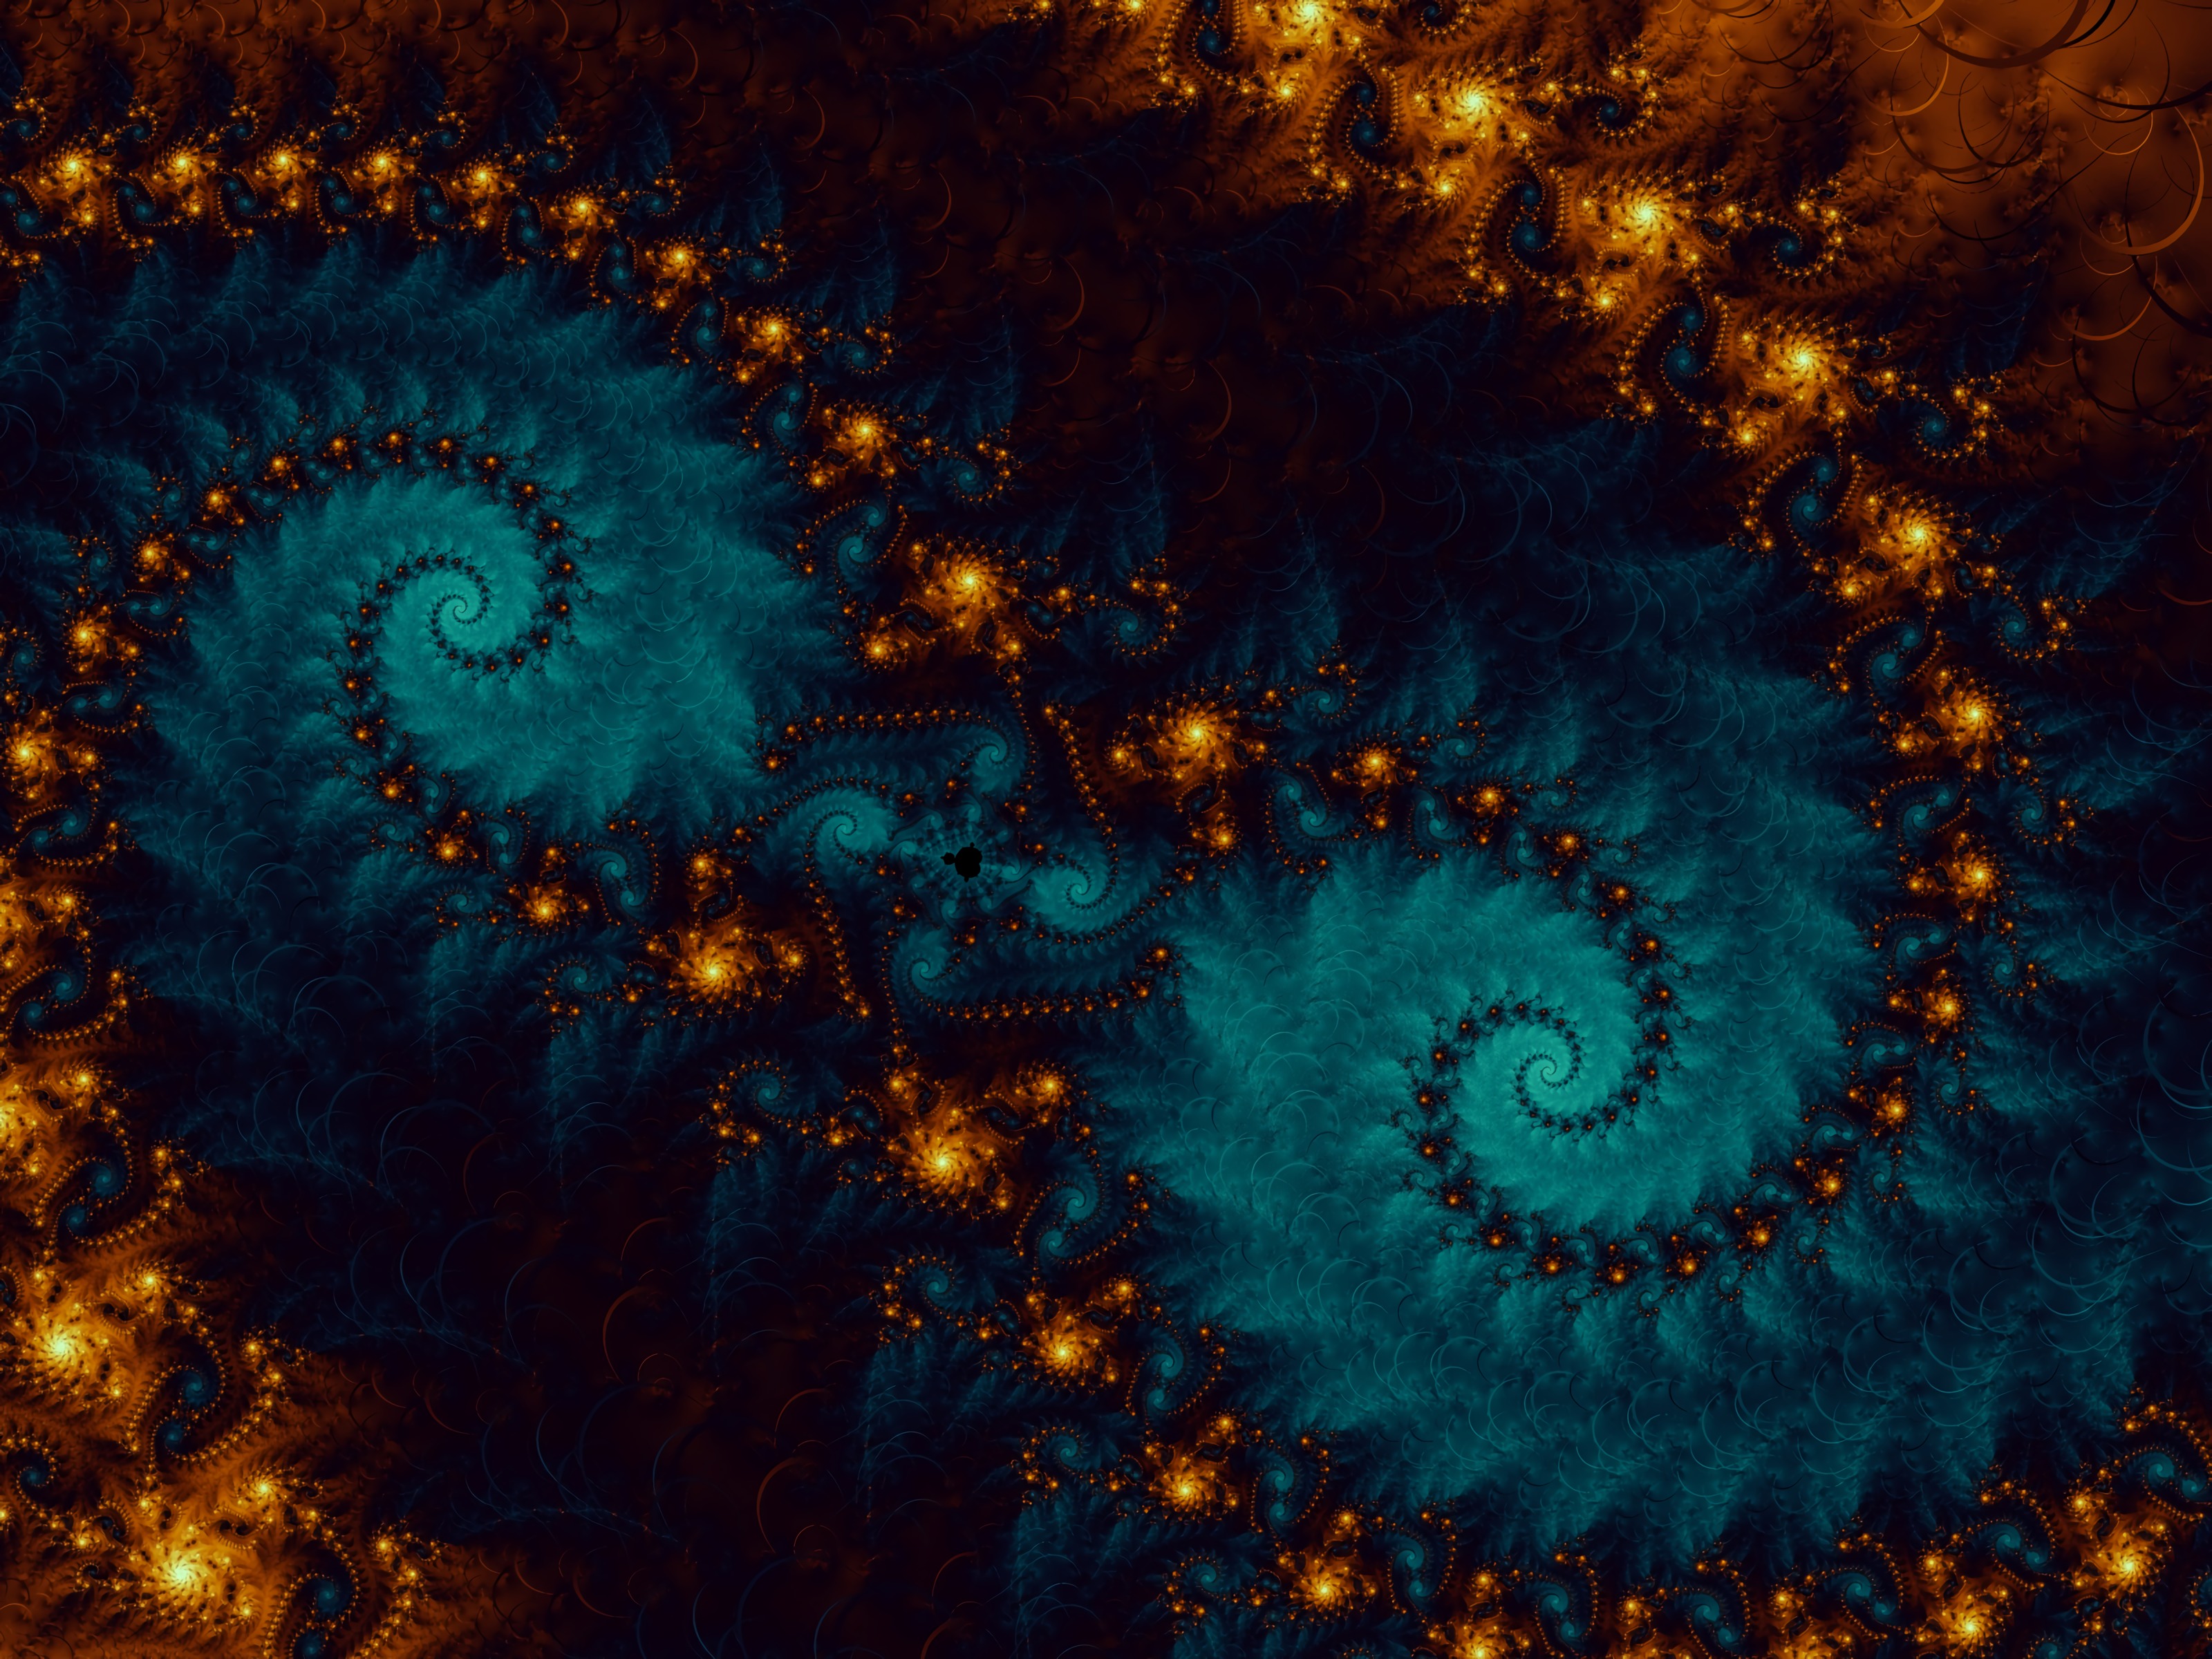 fractal, swirling, abstract, pattern, spiral, involute UHD